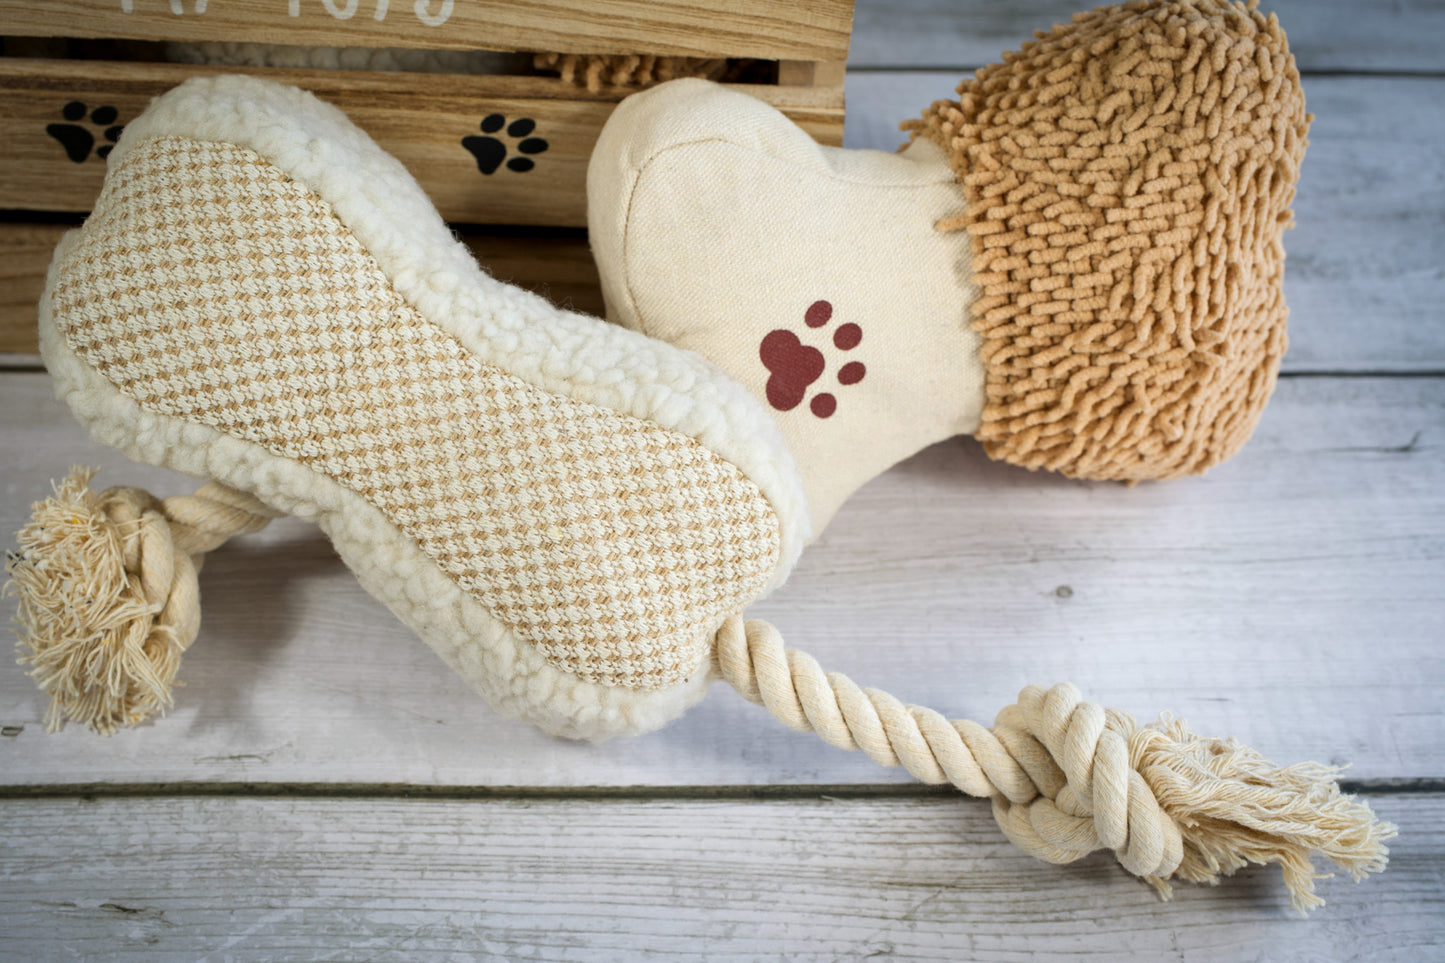 Close-up view of two bone-shaped plush and rope dog toys.